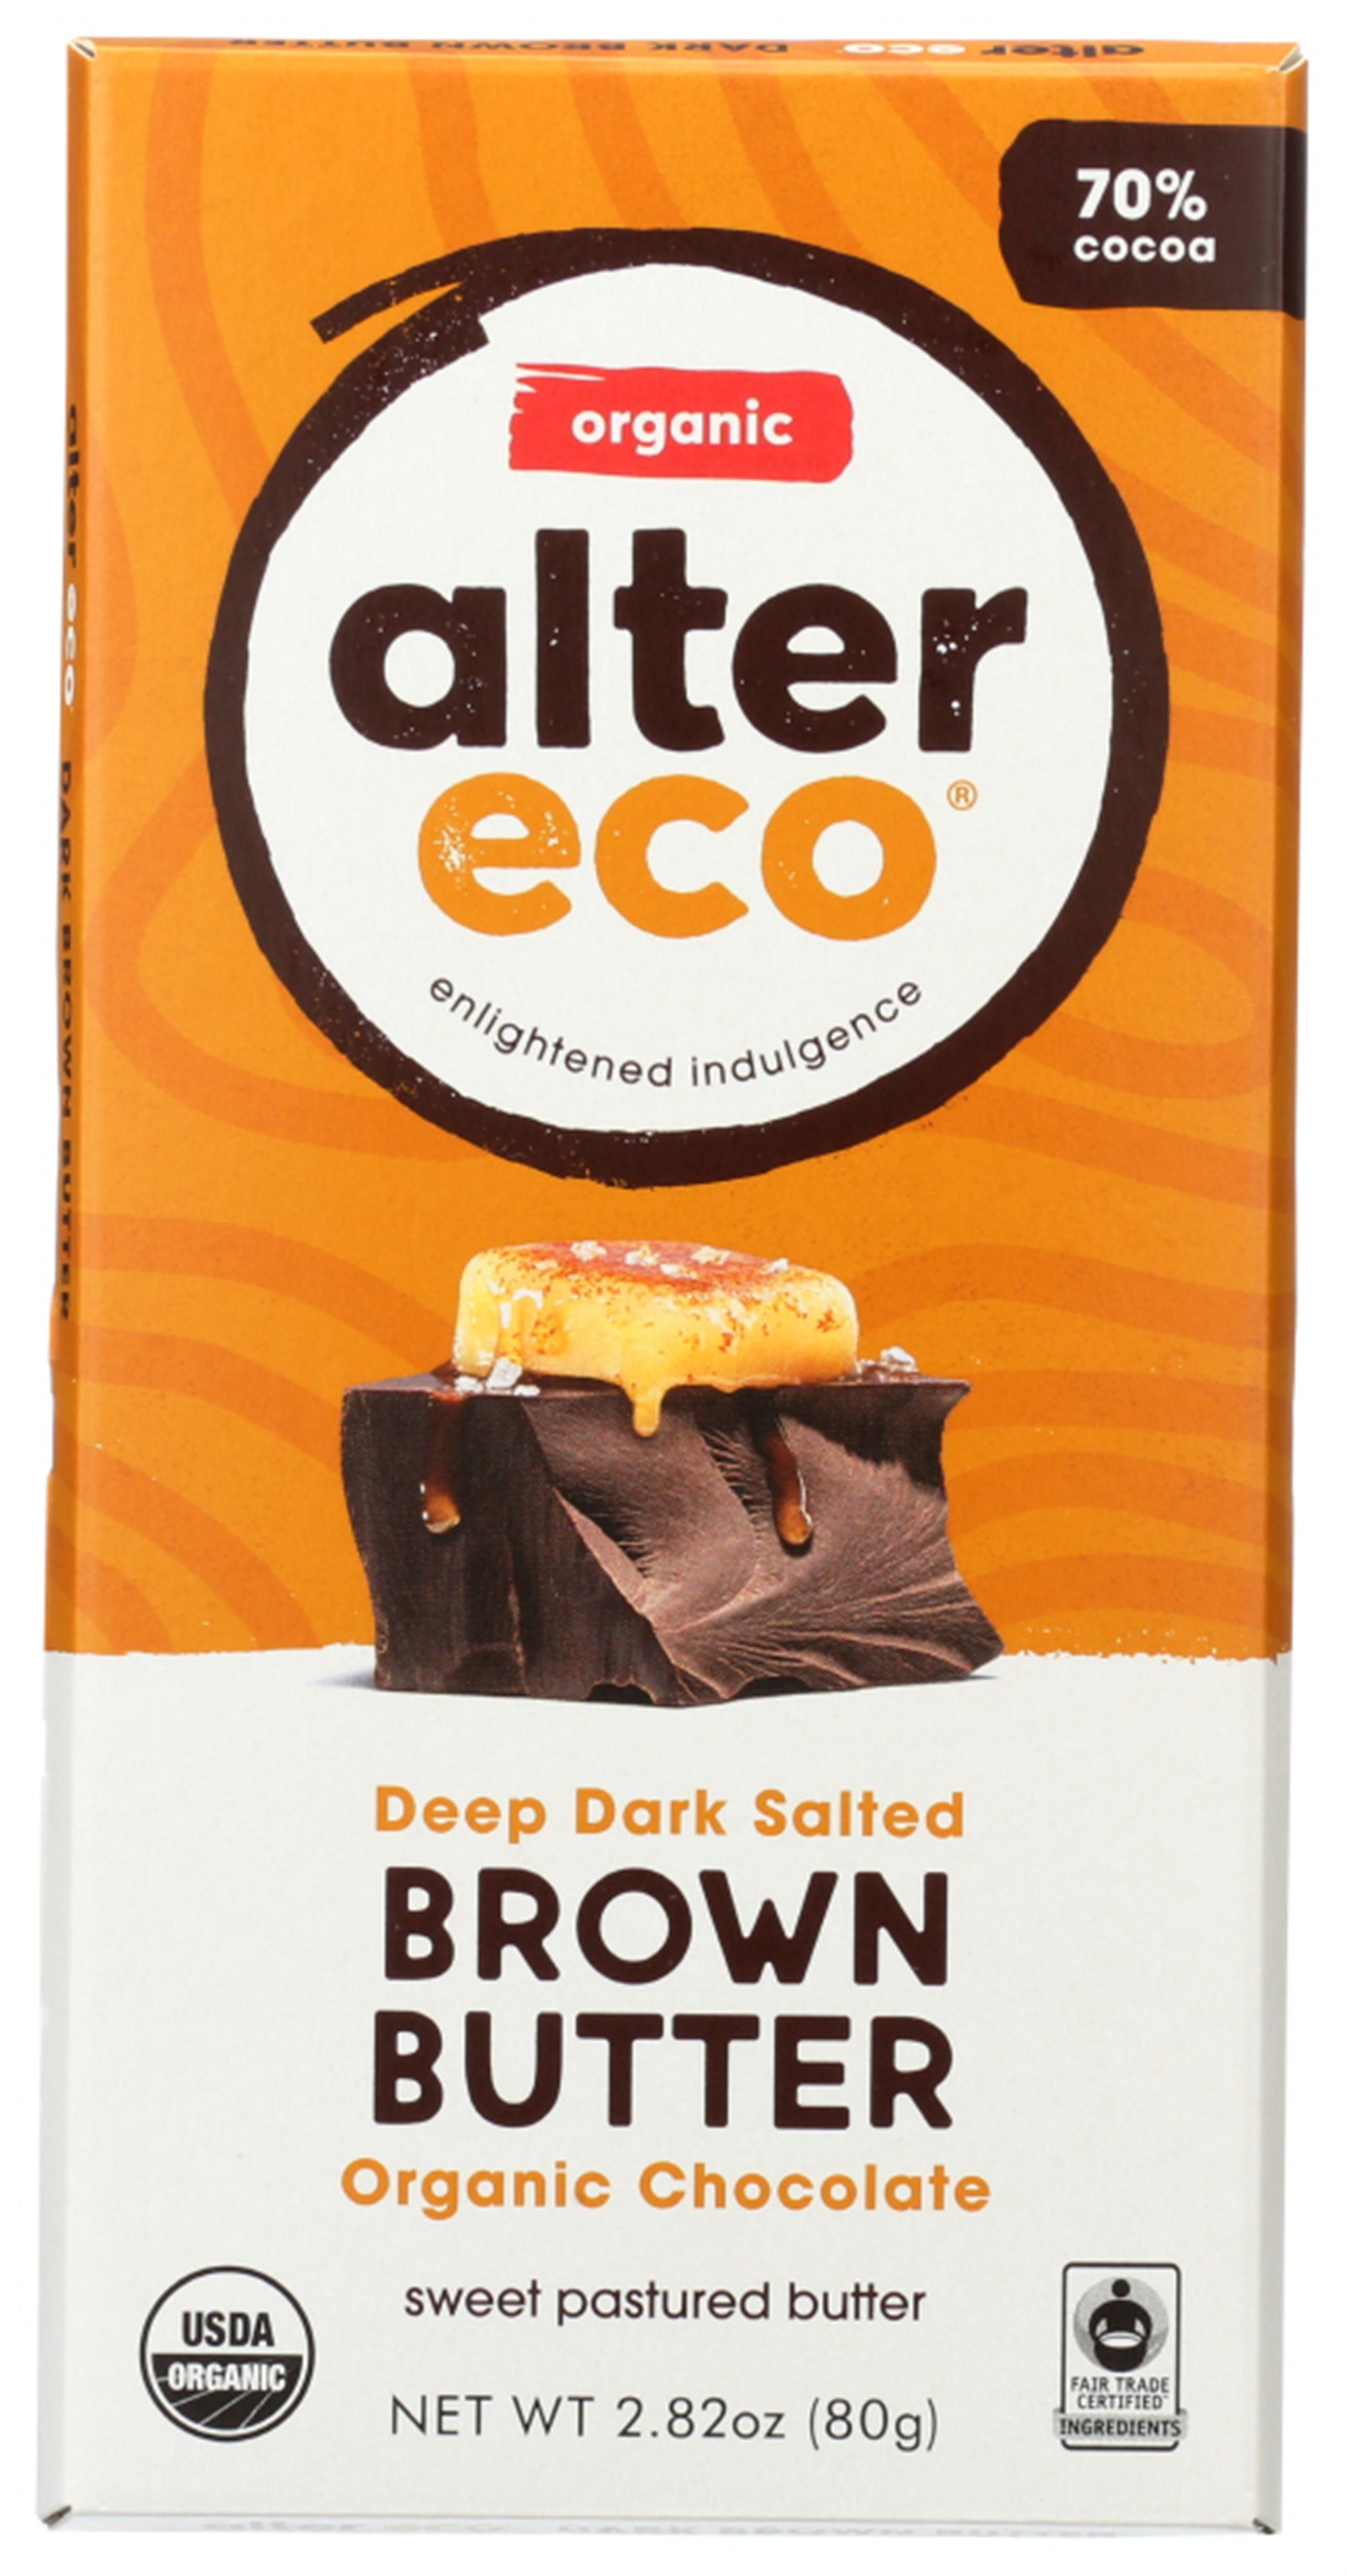 Alter Eco Dark Salted Brown Butter Organic Chocolate Bar, 2.82 Oz - image 1 of 2